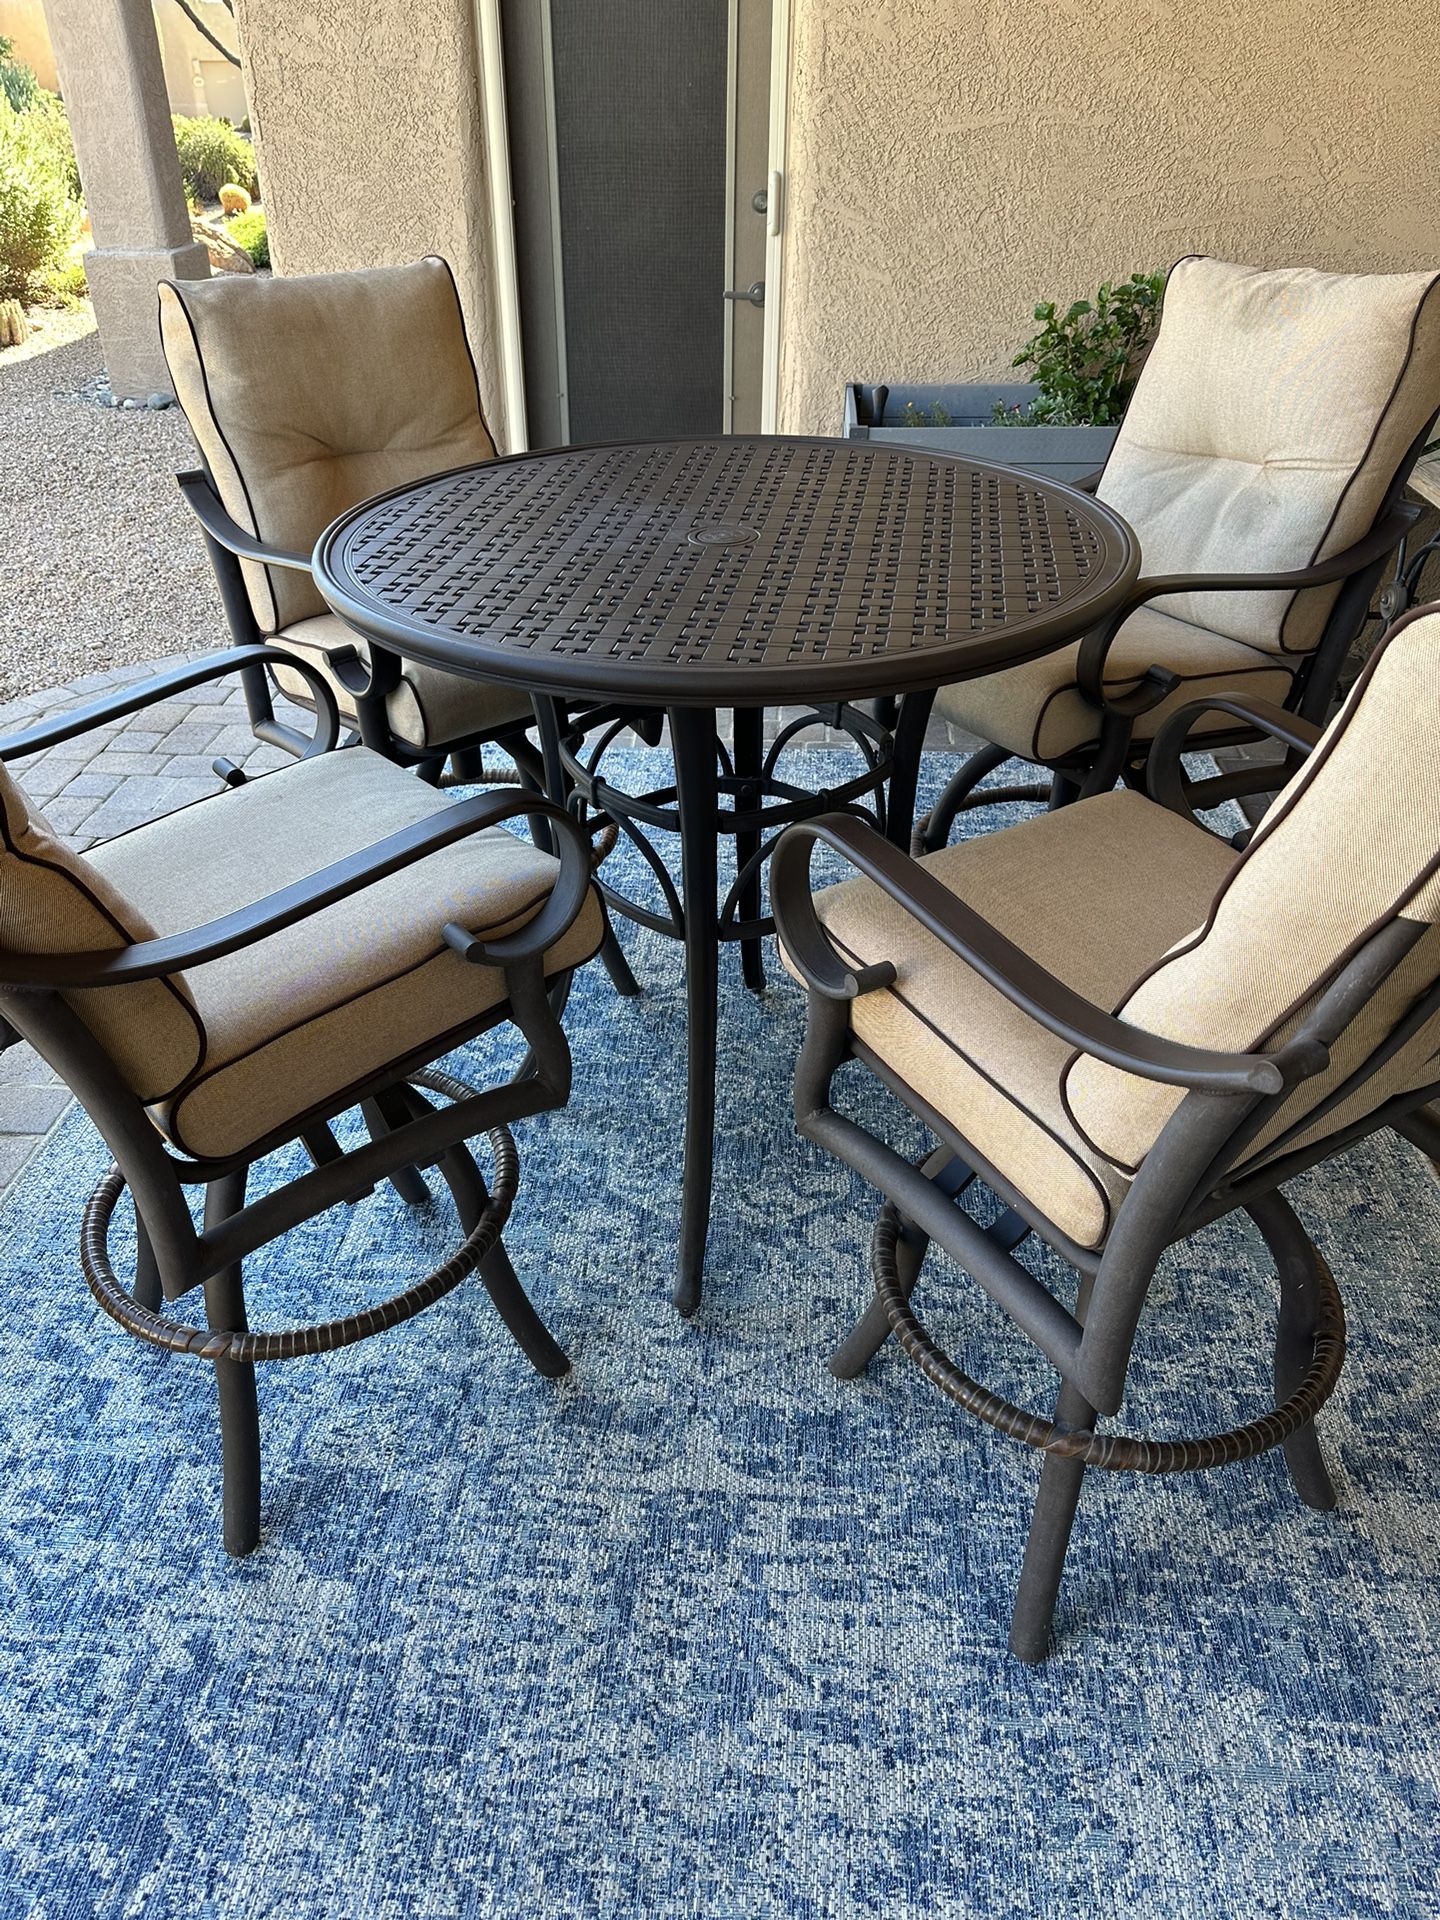 Mallin Patio Table & Chairs